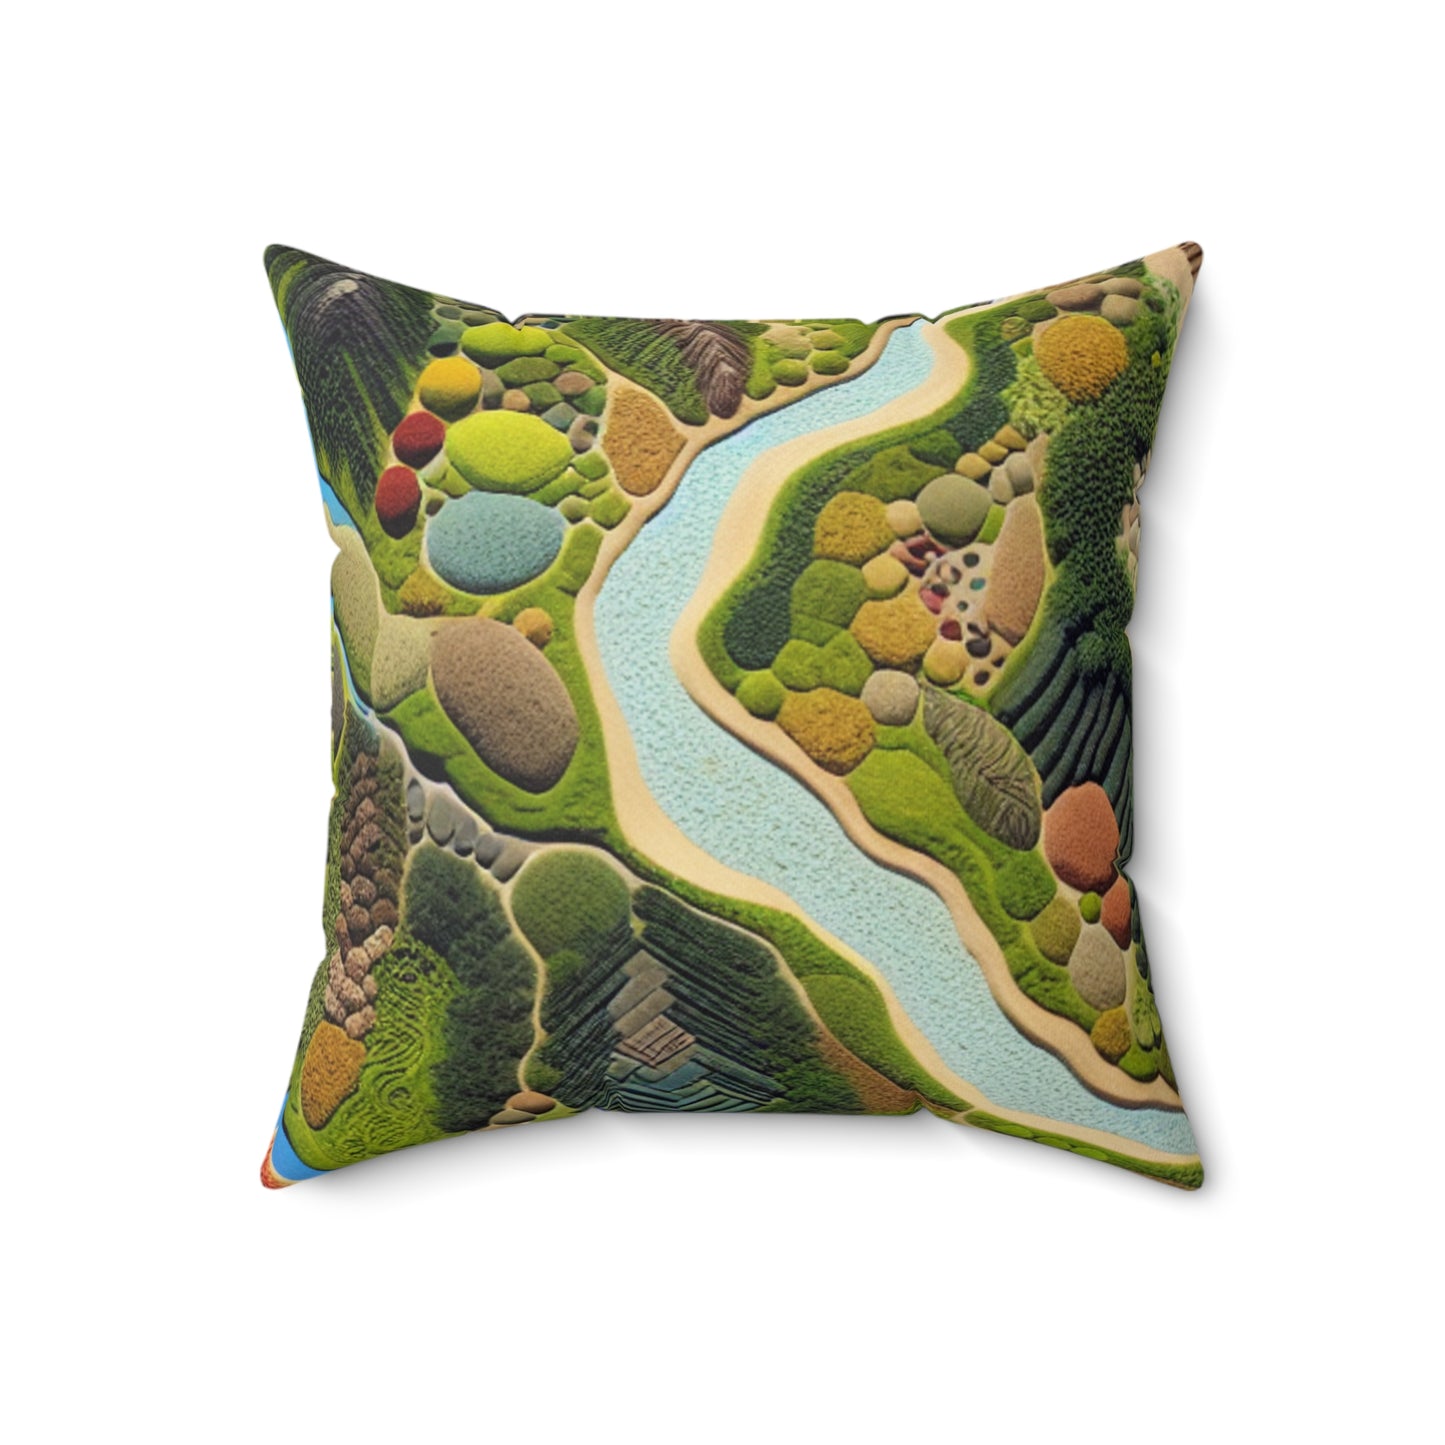 "Mapping Mother Nature: Crafting a Living Mural of Our Region". - The Alien Spun Polyester Square Pillow Land Art Style